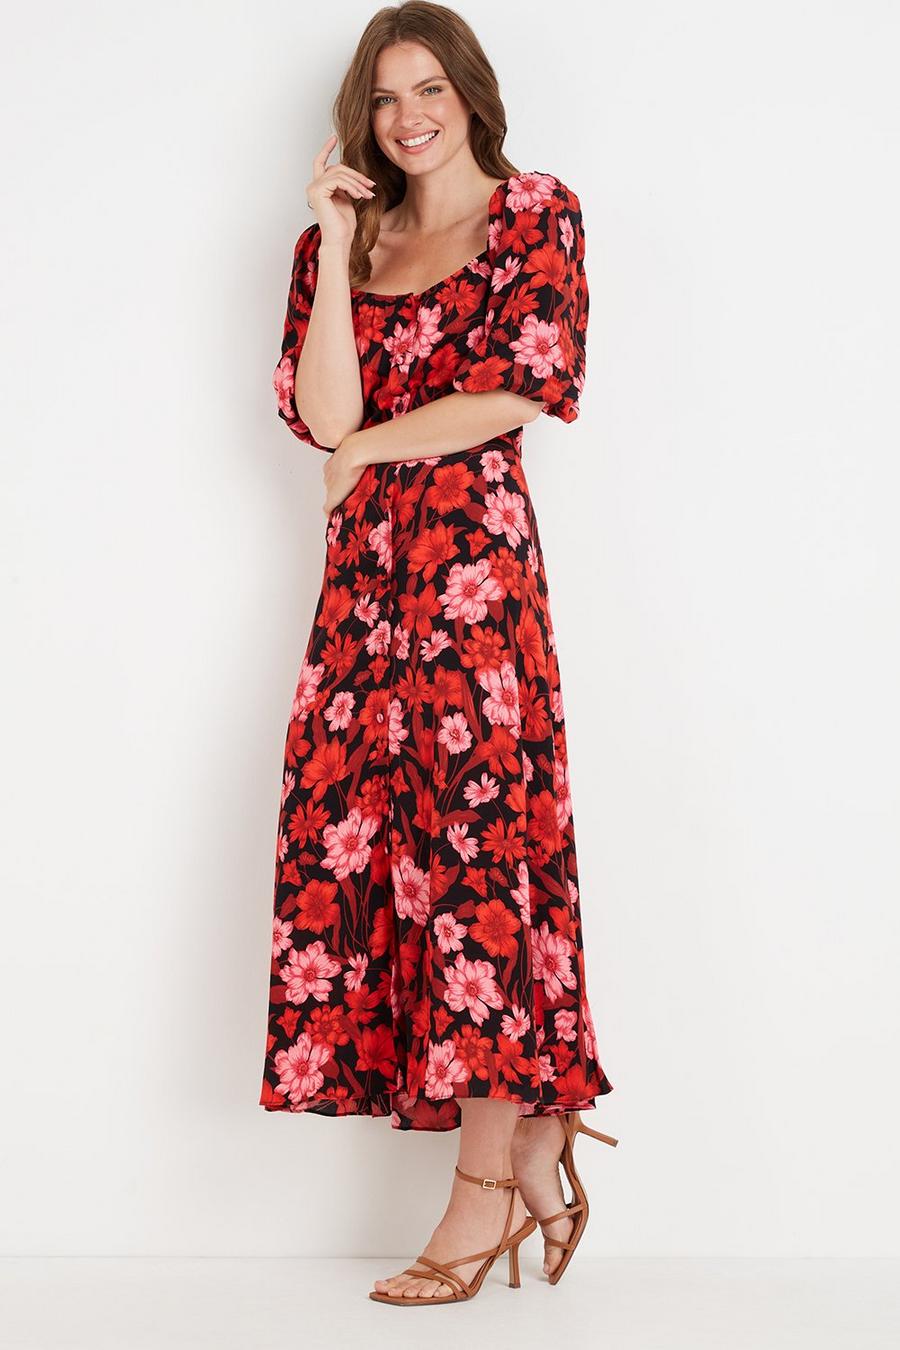 Tall Black and Red Floral Square Neck Dress